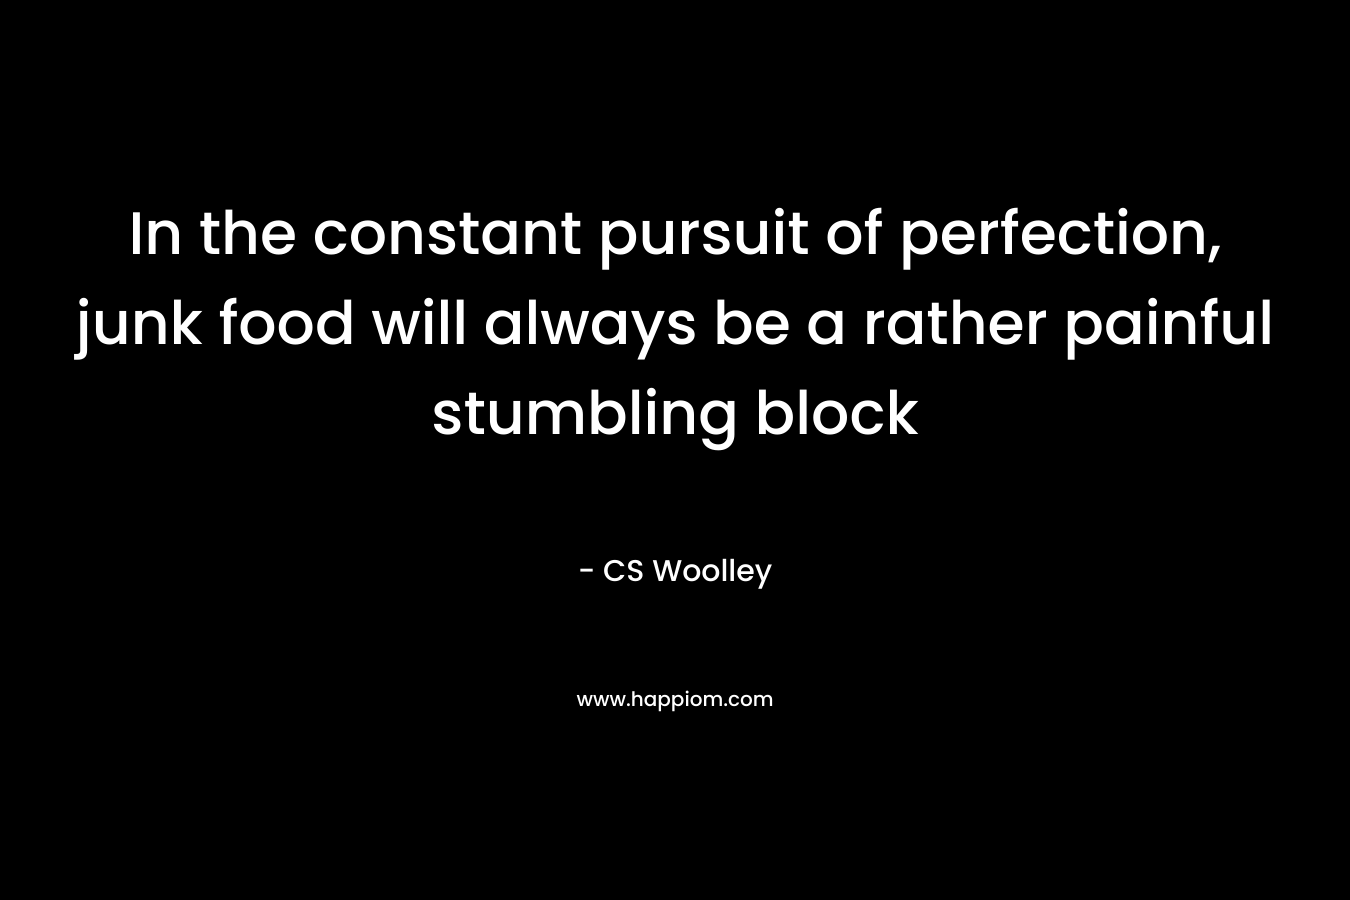 In the constant pursuit of perfection, junk food will always be a rather painful stumbling block – CS Woolley